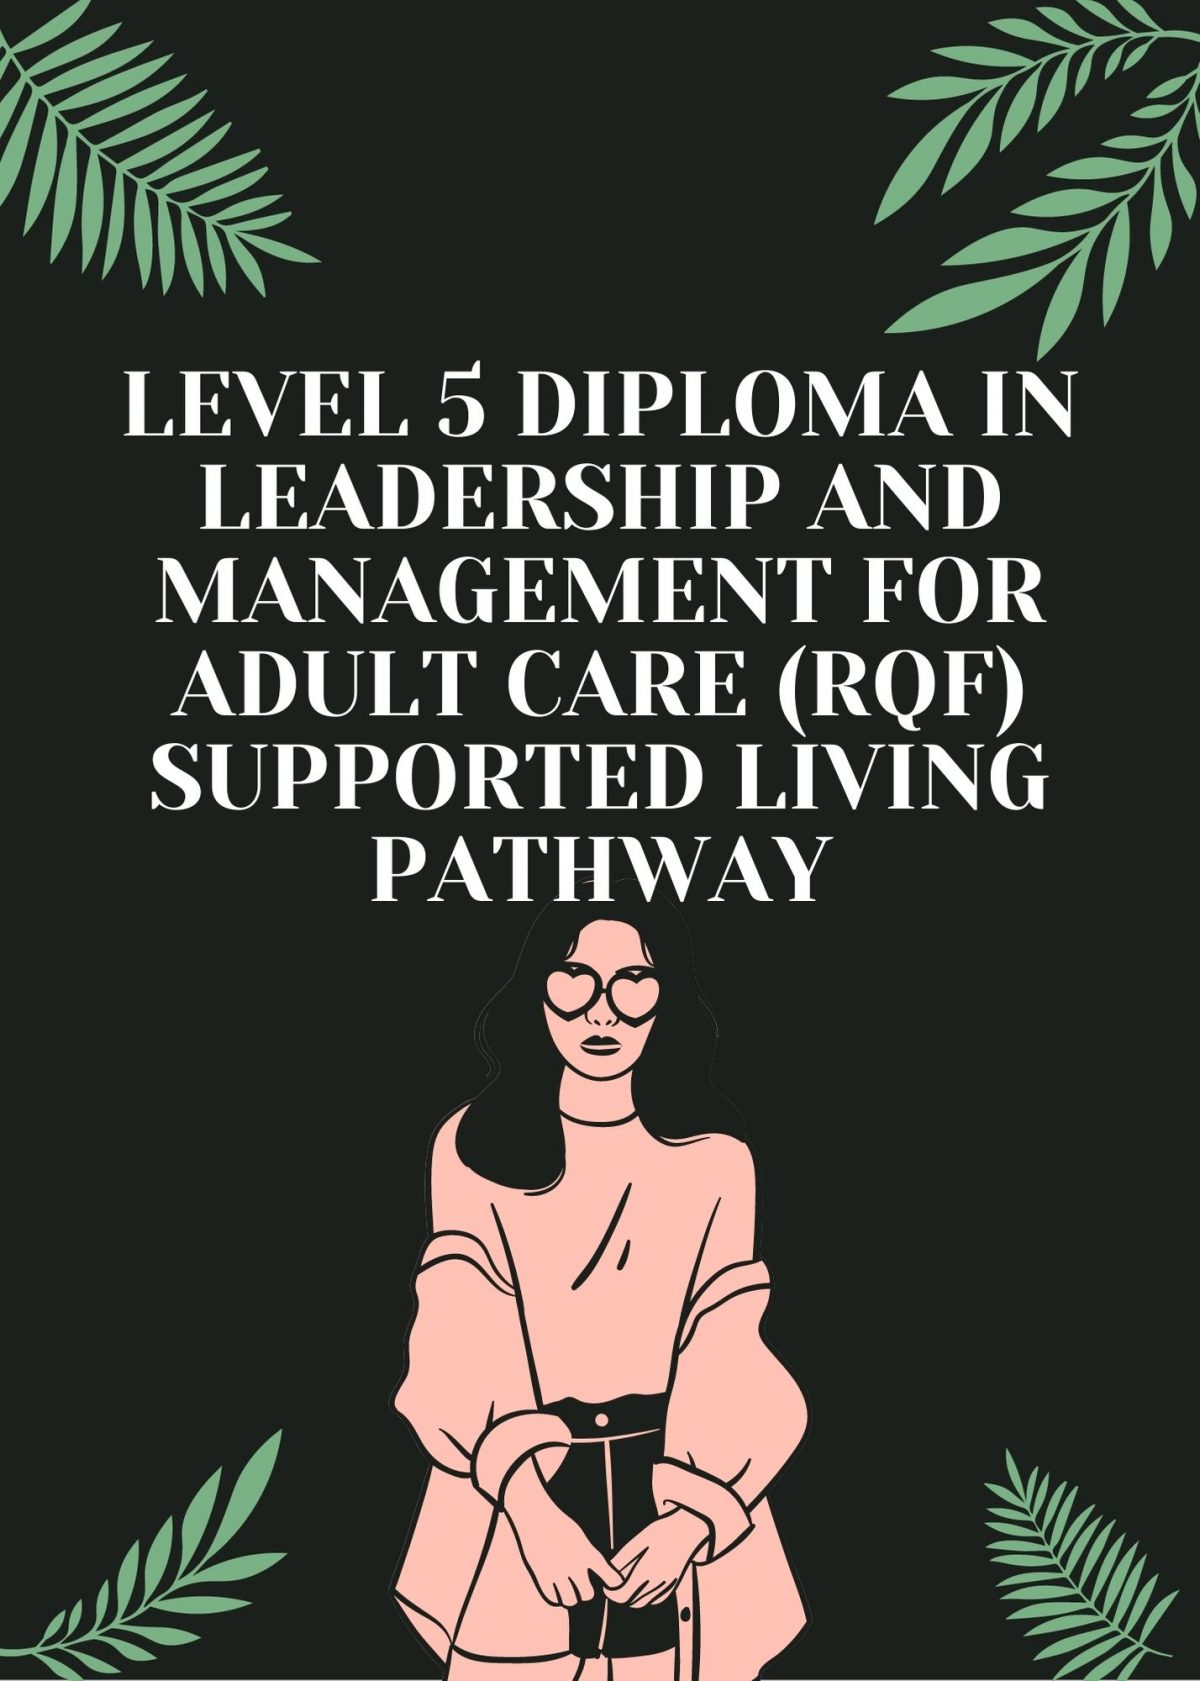 Level 5 Diploma in Leadership and Management for Adult Care (RQF) Supported Living Pathway|https://verrolynetraining.co.uk/